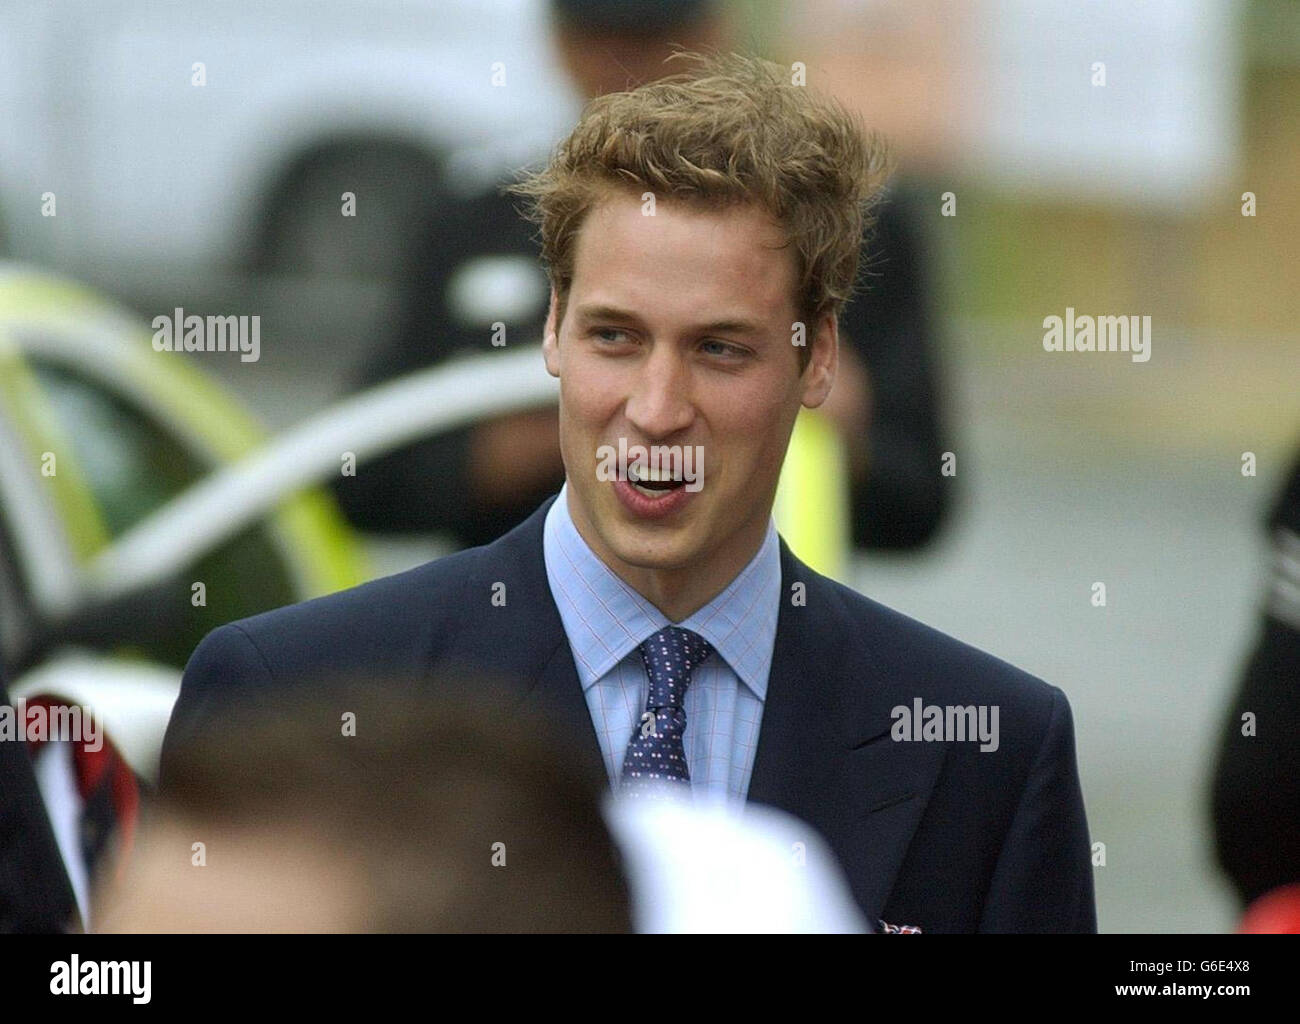 Prince William meets wellwishers at Bangor Station, where he and his father, Prince Charles, arrived for a visit to Wales in the run-up to his 21st birthday. * Two days before coming-of-age, William and his father were visiting the Anglesey Food Fair in north Wales and Newport Action for Single Homeless (NASH) in south Wales. Stock Photo